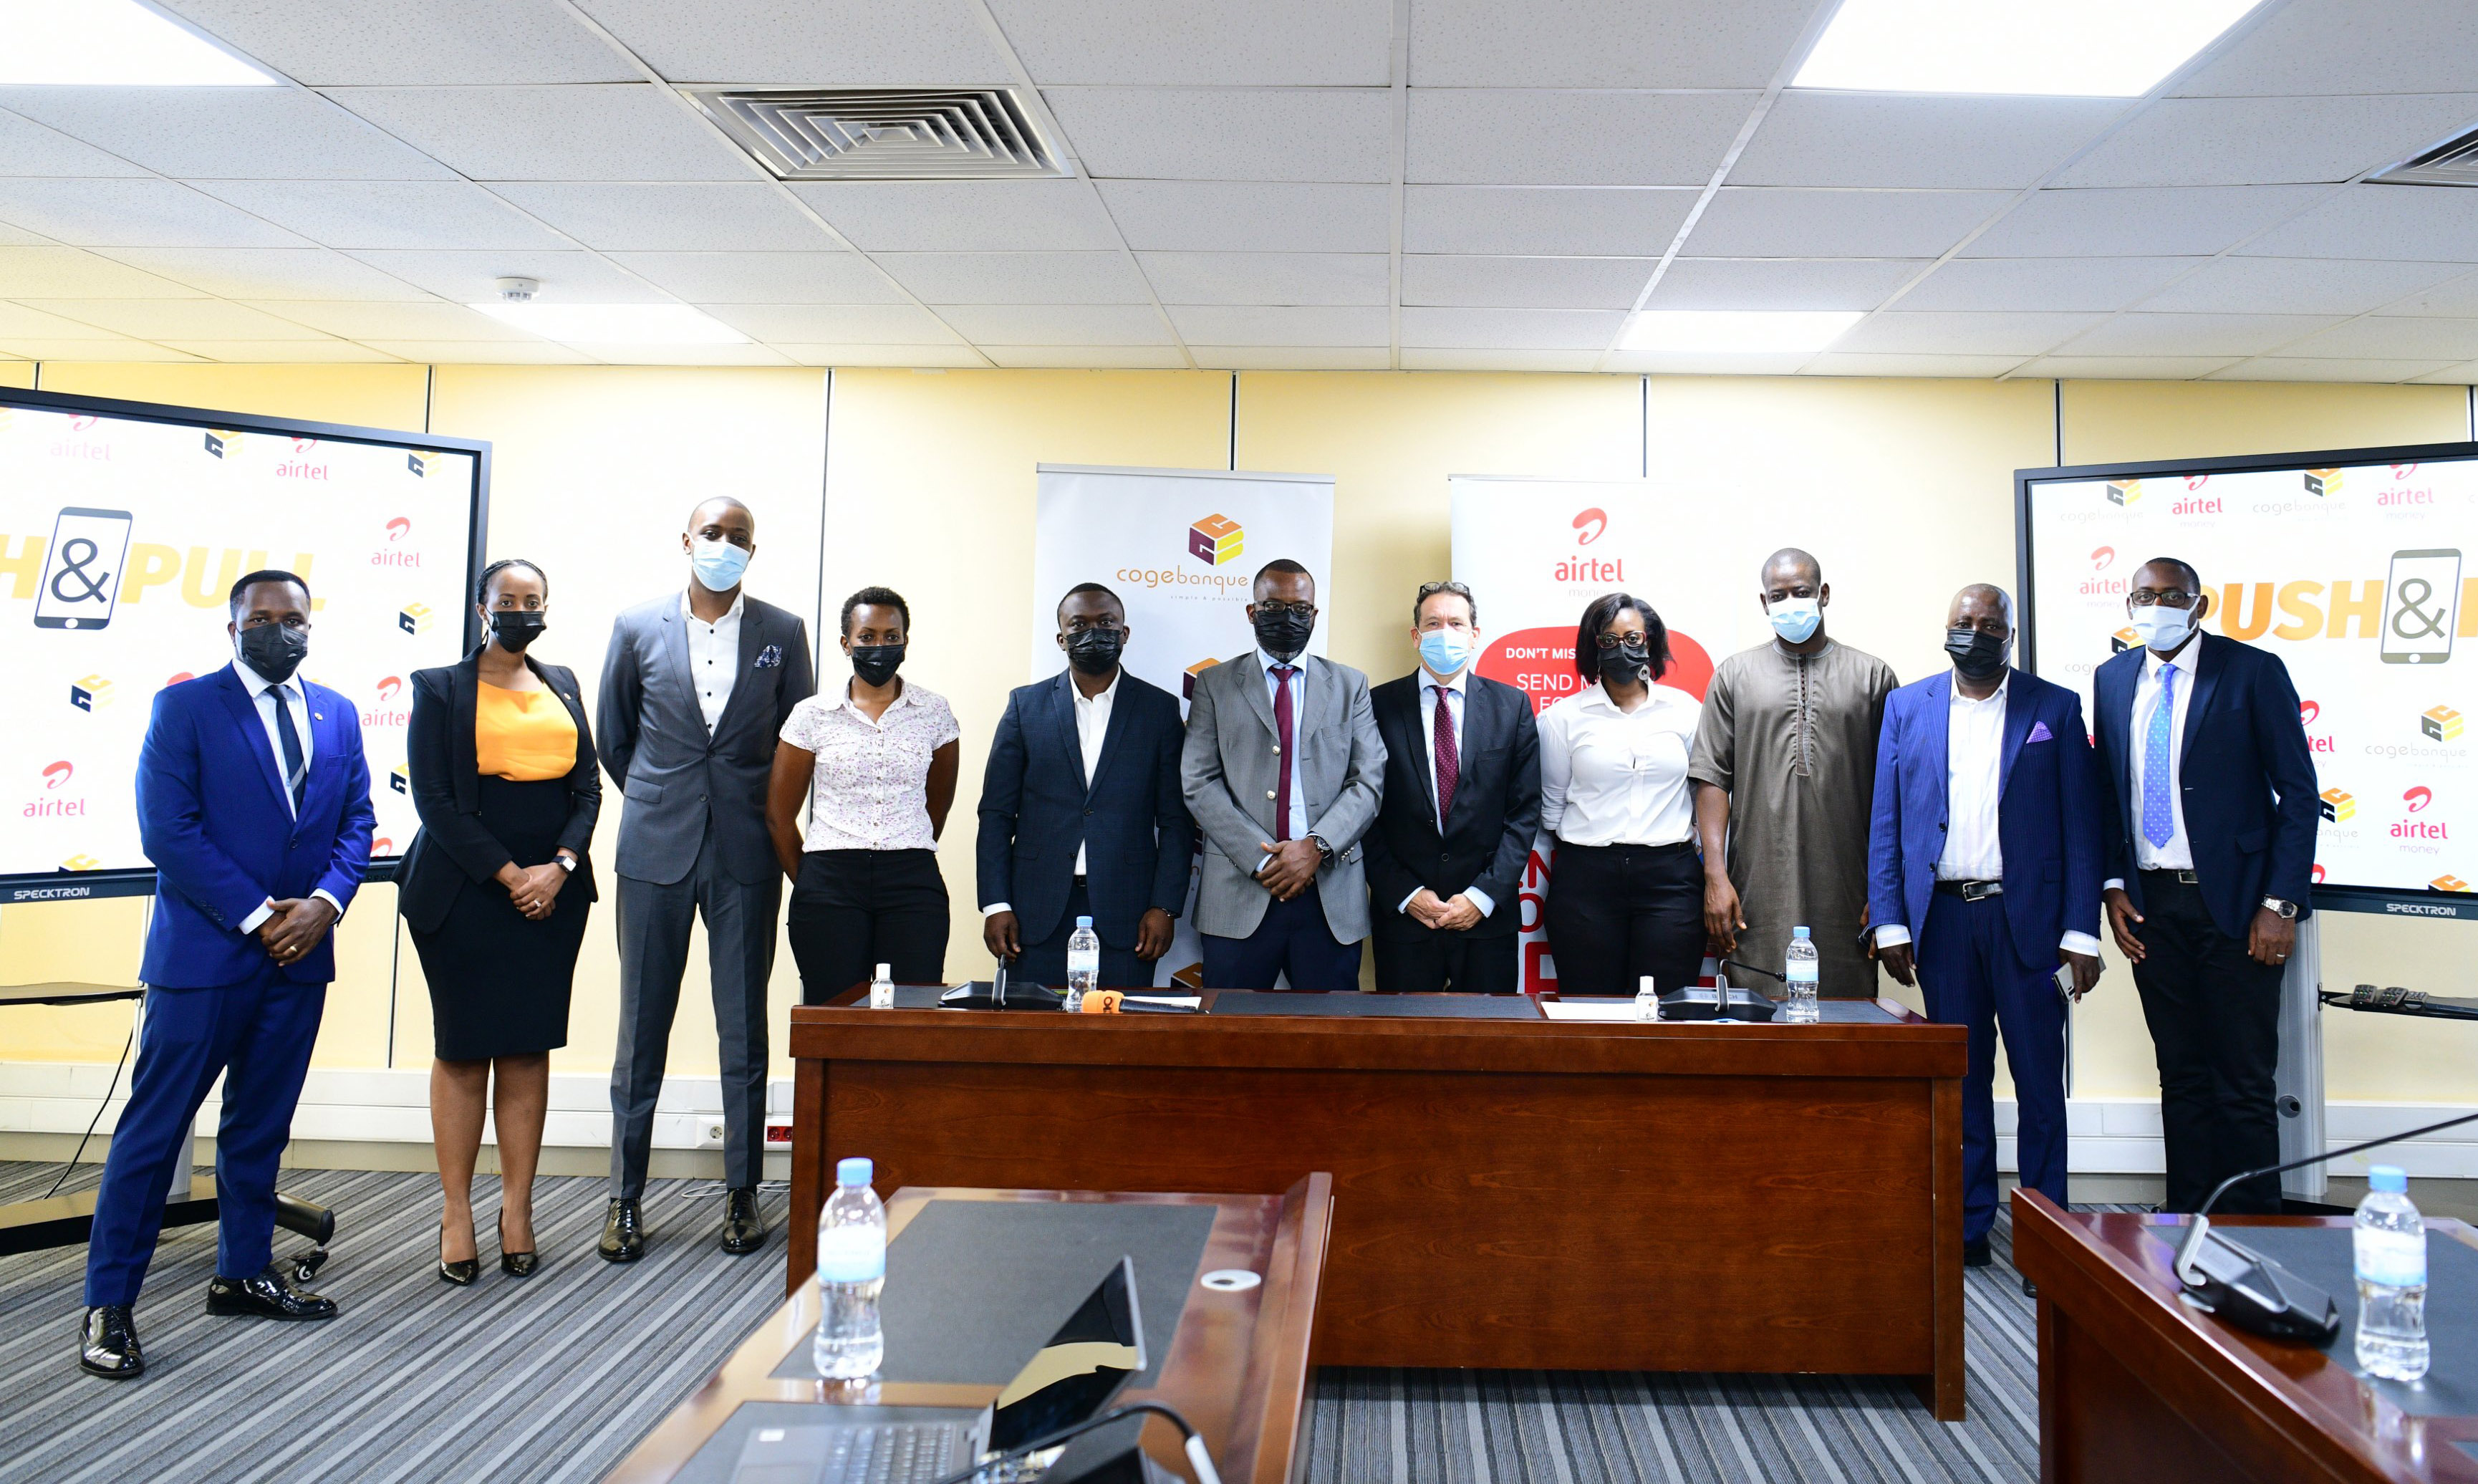 Officials pose for a group photo during the launch of the Push and Pull partnership between Airtel and Cogebanque on Thursday October 28. Courtesy.